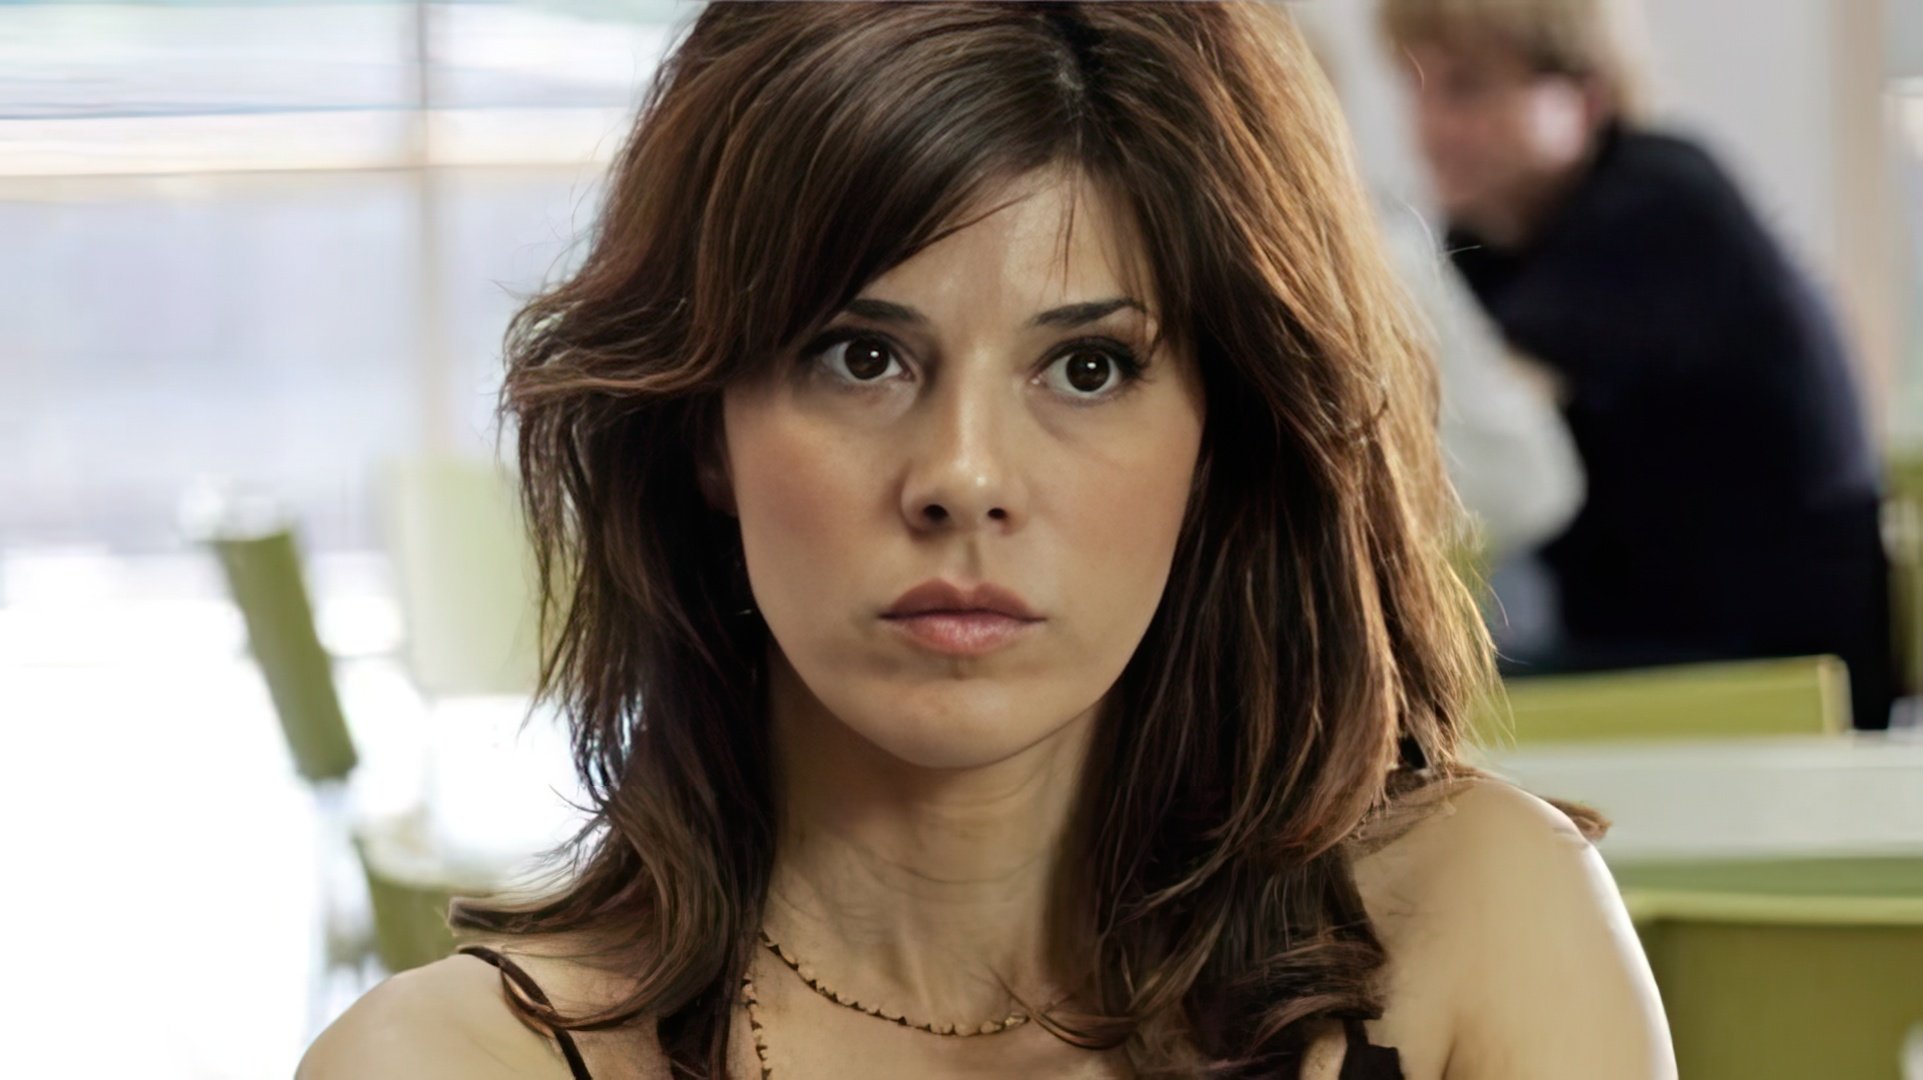 Marisa Tomei in the movie 'Before the Devil Knows You're Dead'